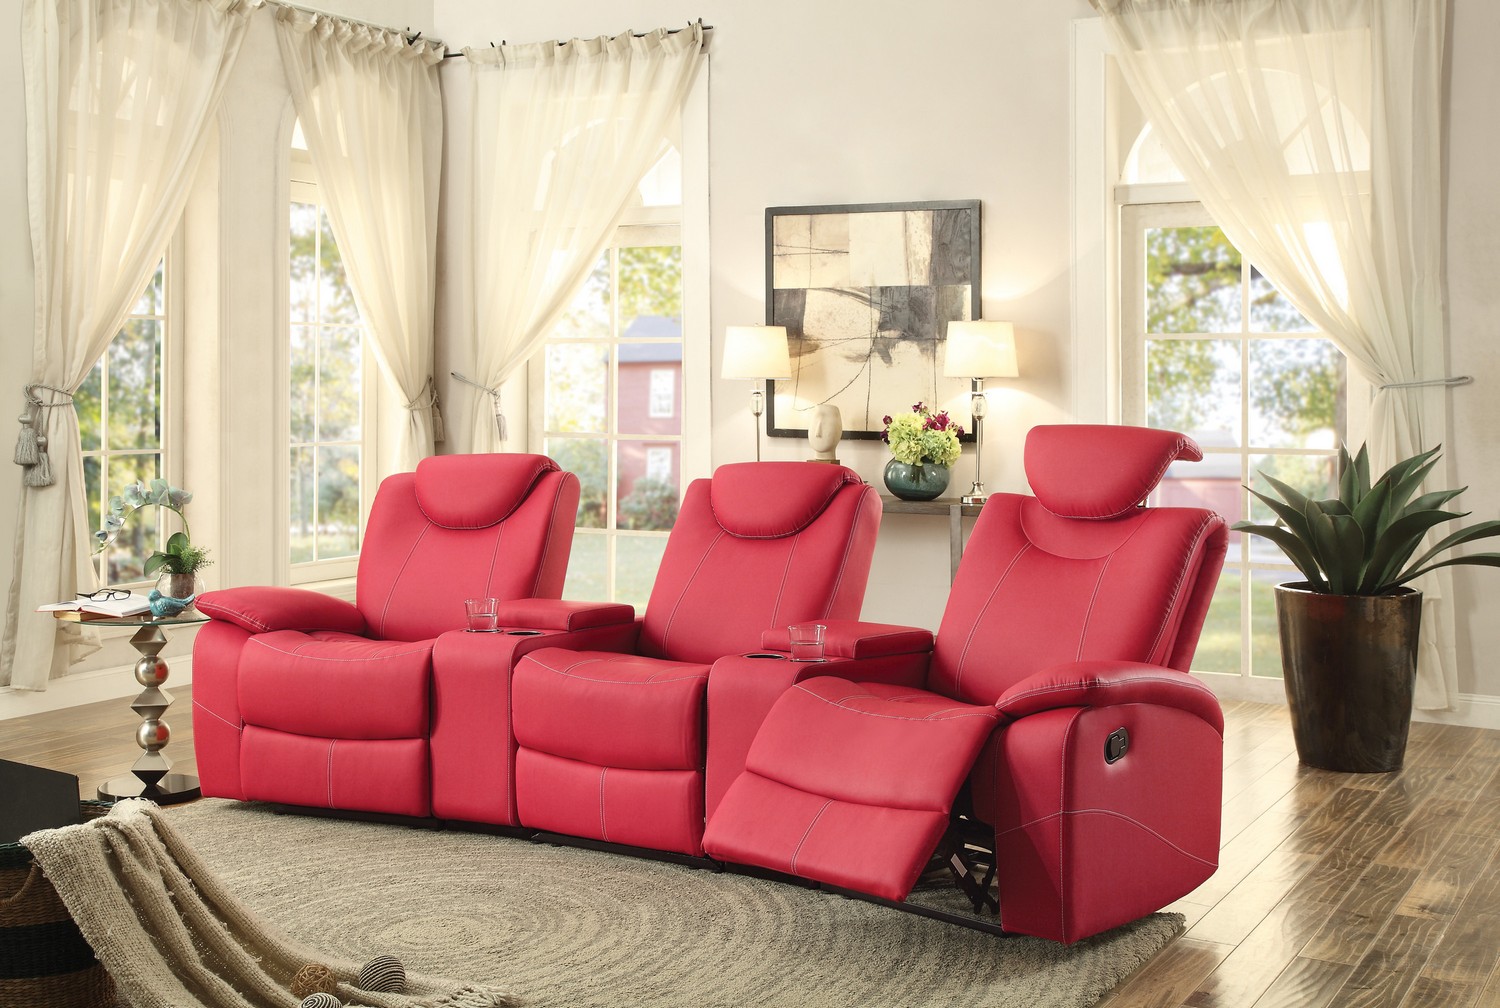 Homelegance Talbot Reclining Theater Seating - Bonded Leather Match - Red